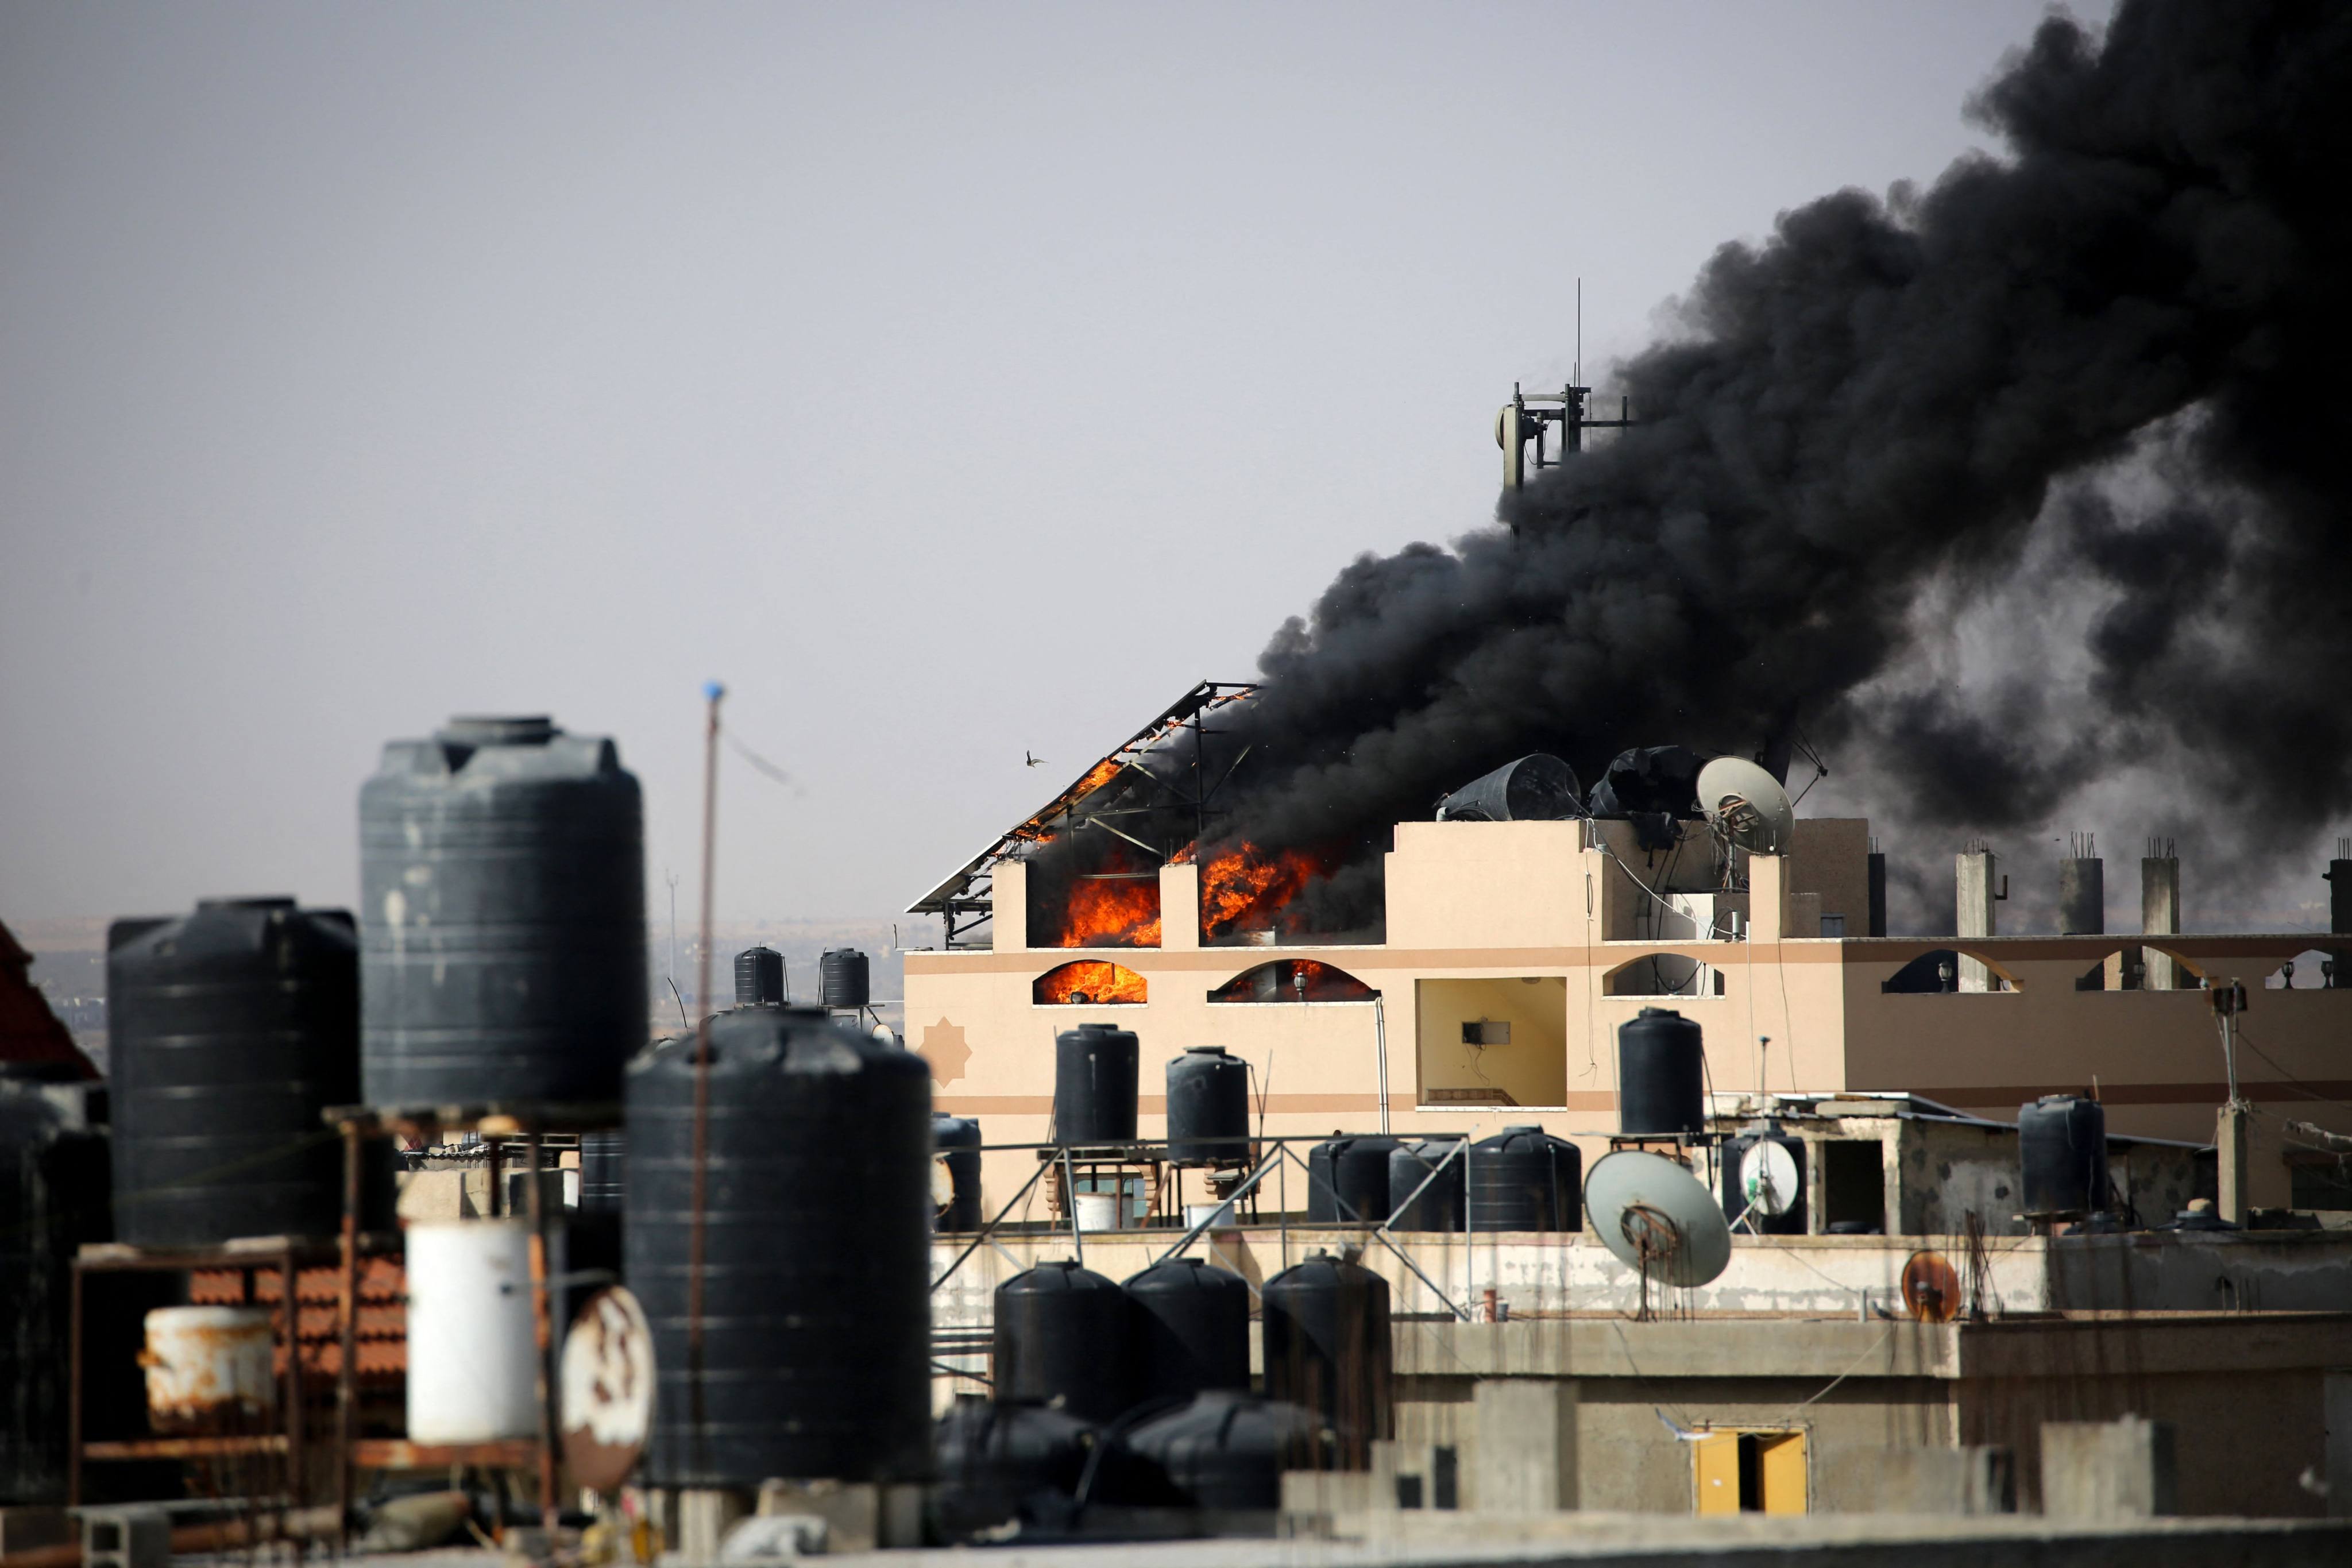 Black smoke rises from a building after Israeli bombardment in Rafah on Friday. Photo: AFP